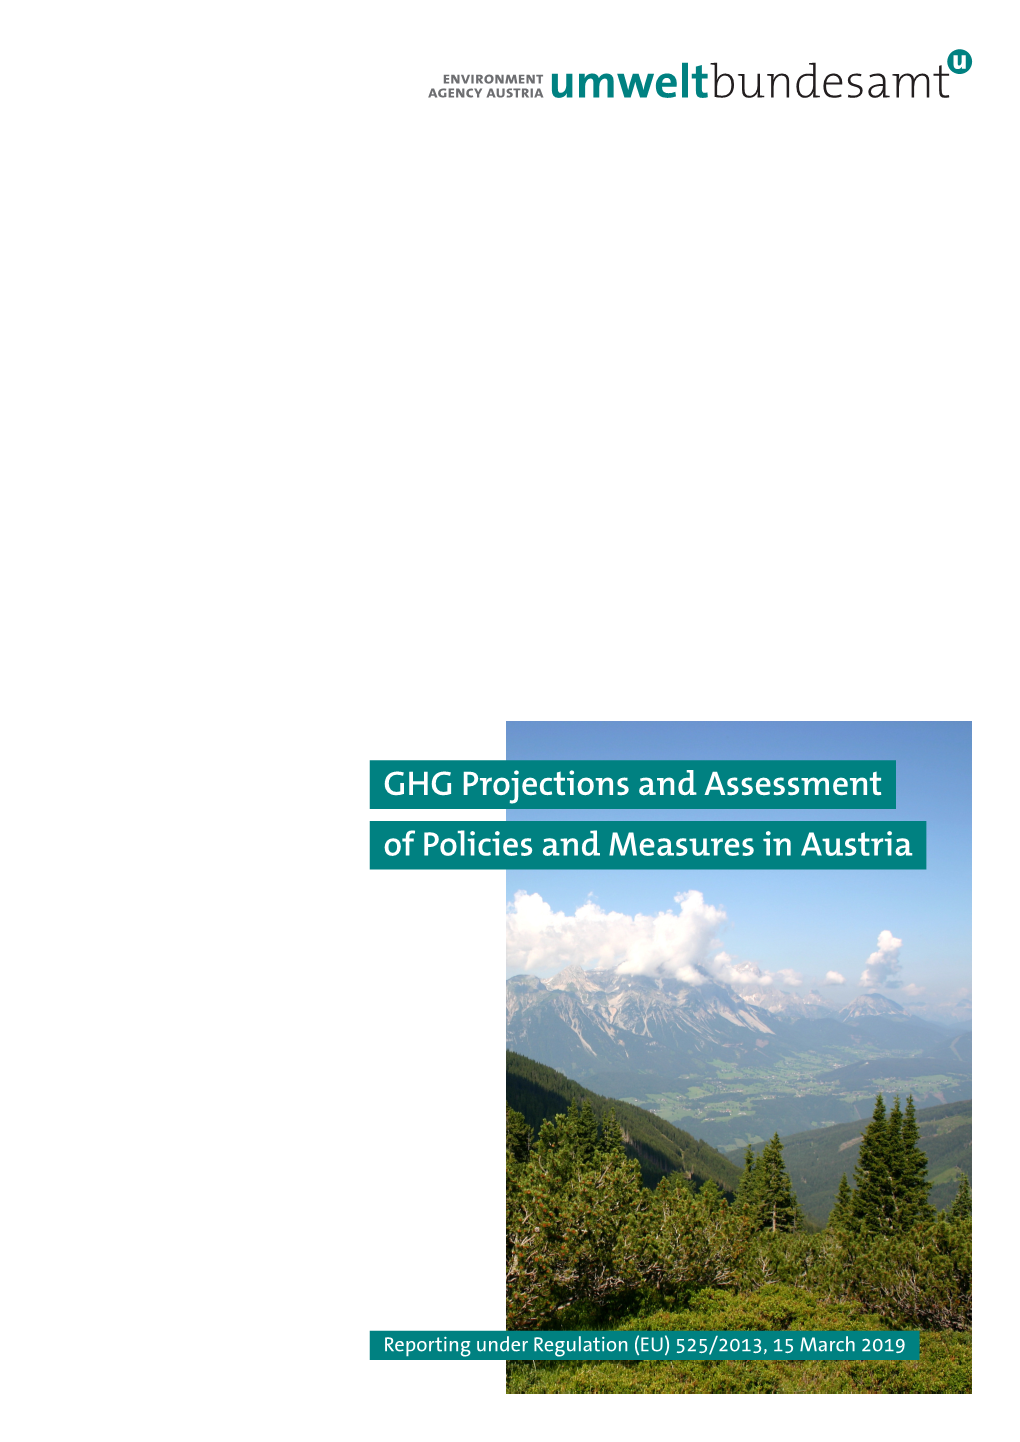 GHG Projections and Assessment of Policies and Measures in Austria